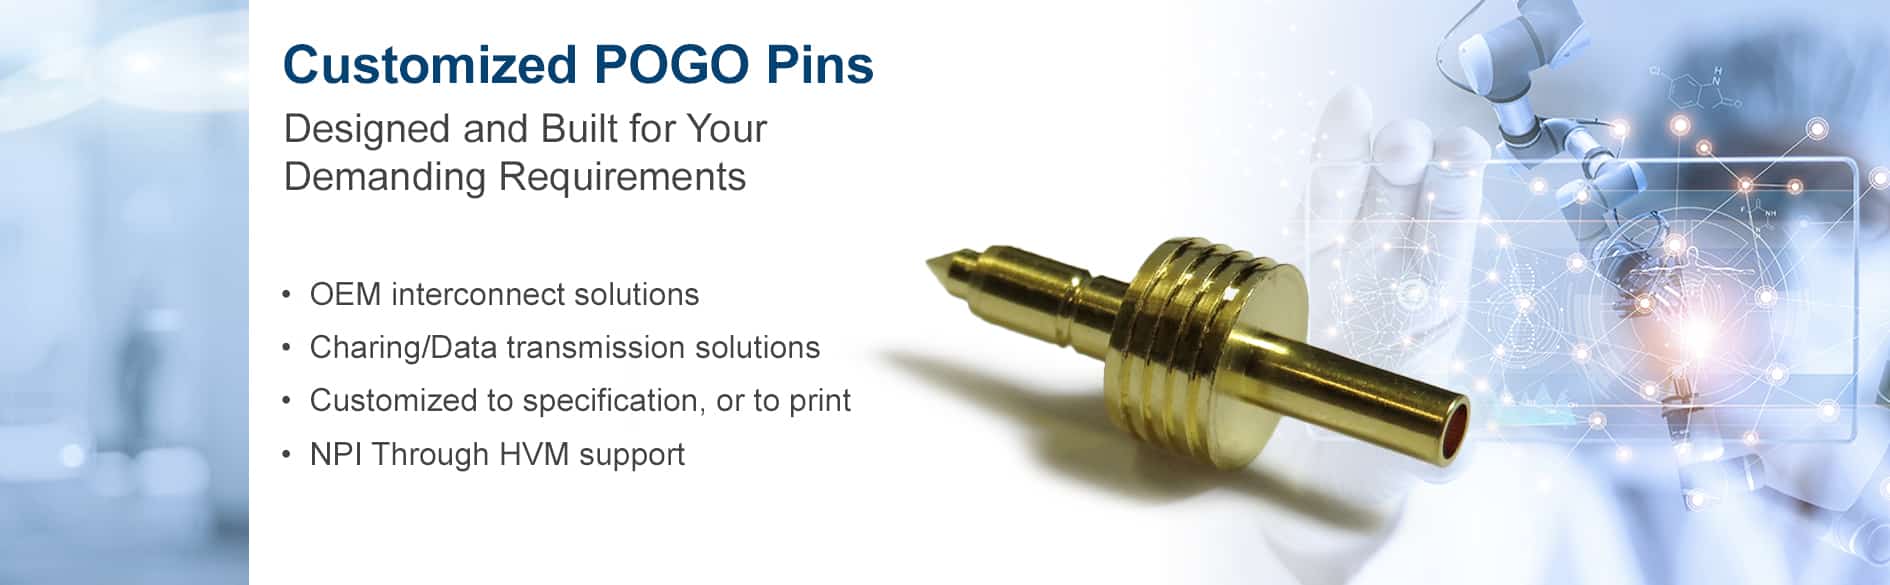 Click to learn more about customized POGO pins